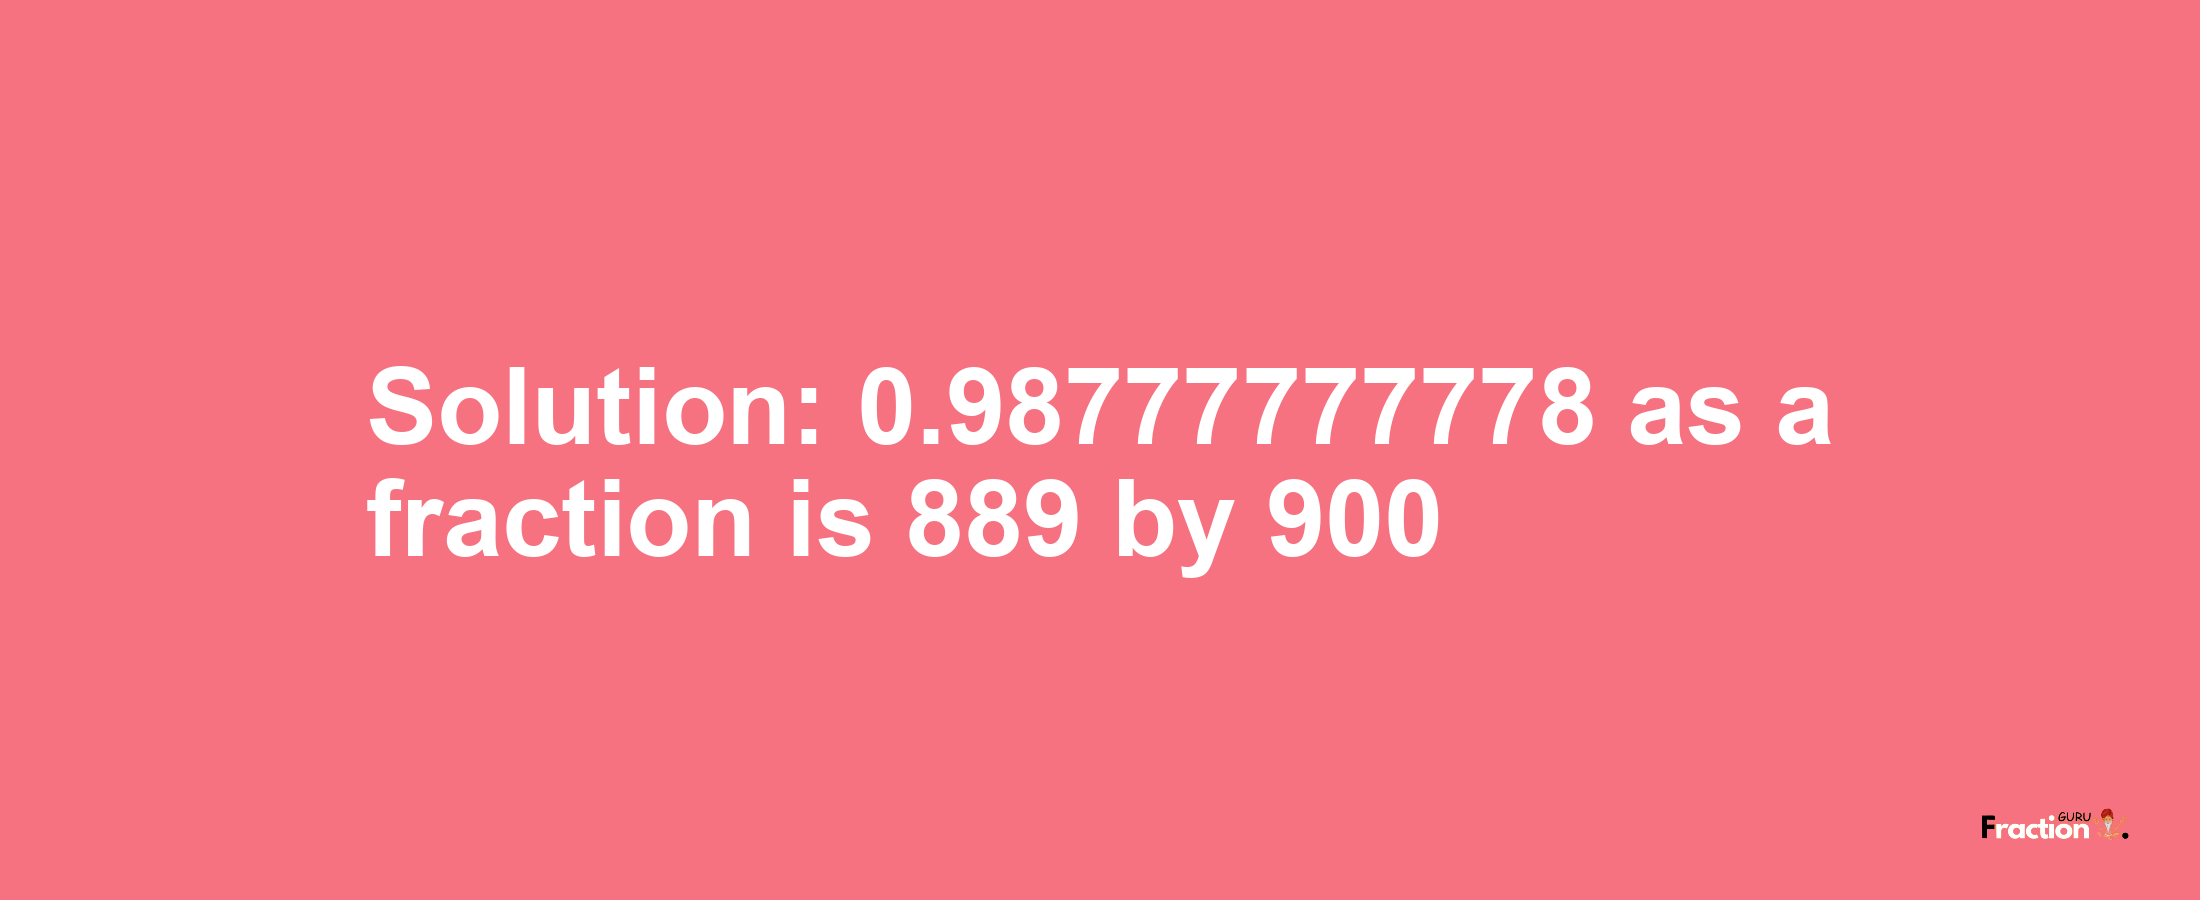 Solution:0.98777777778 as a fraction is 889/900